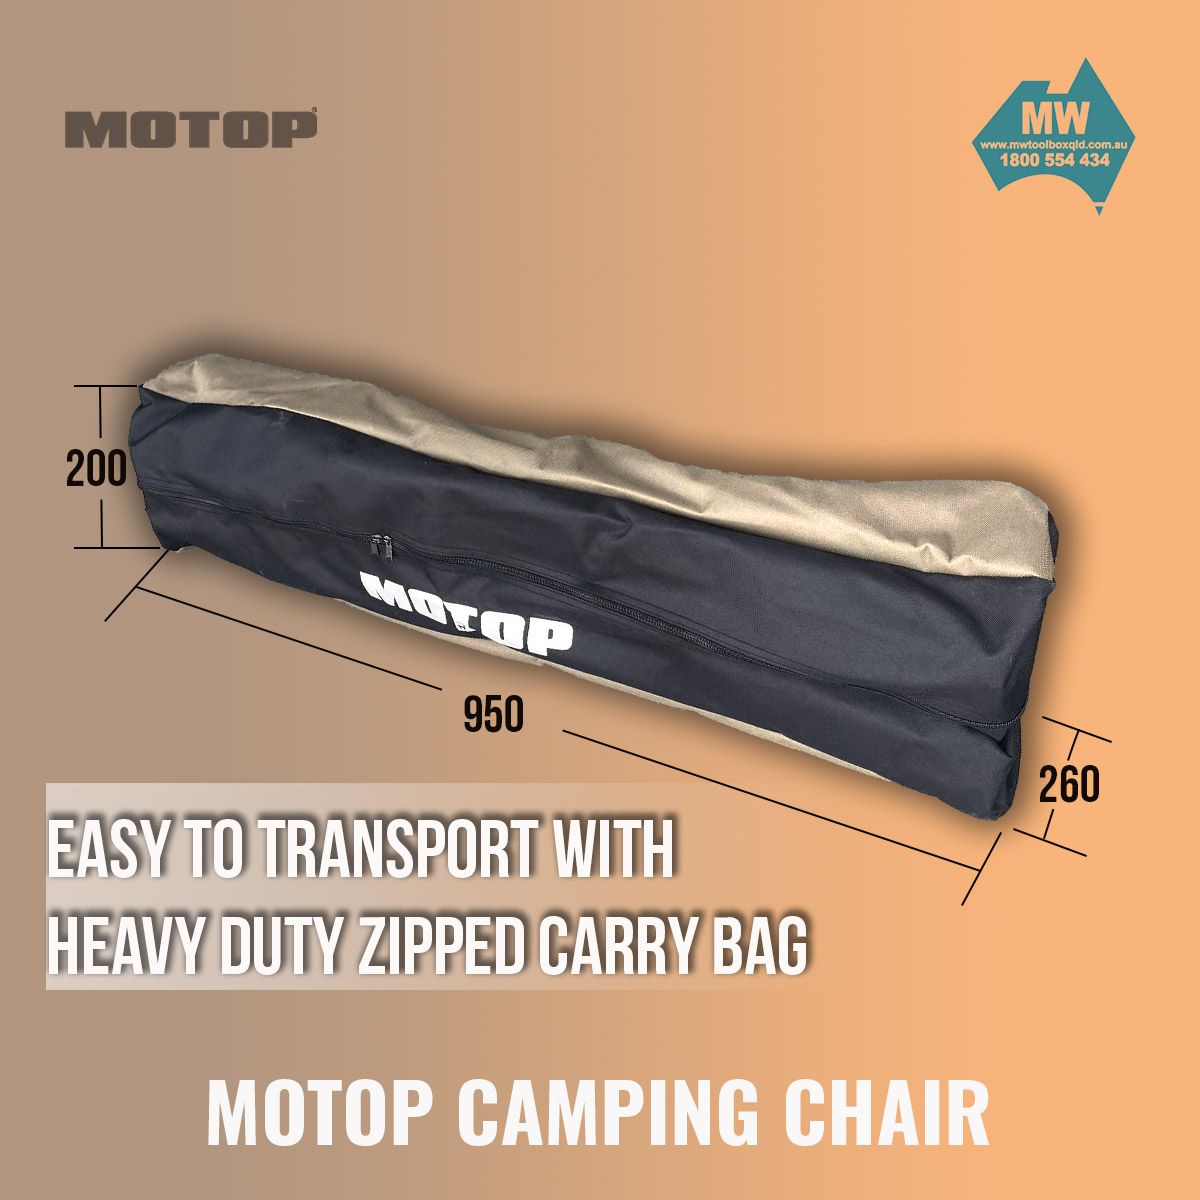 Motop-Camping-Chair-6